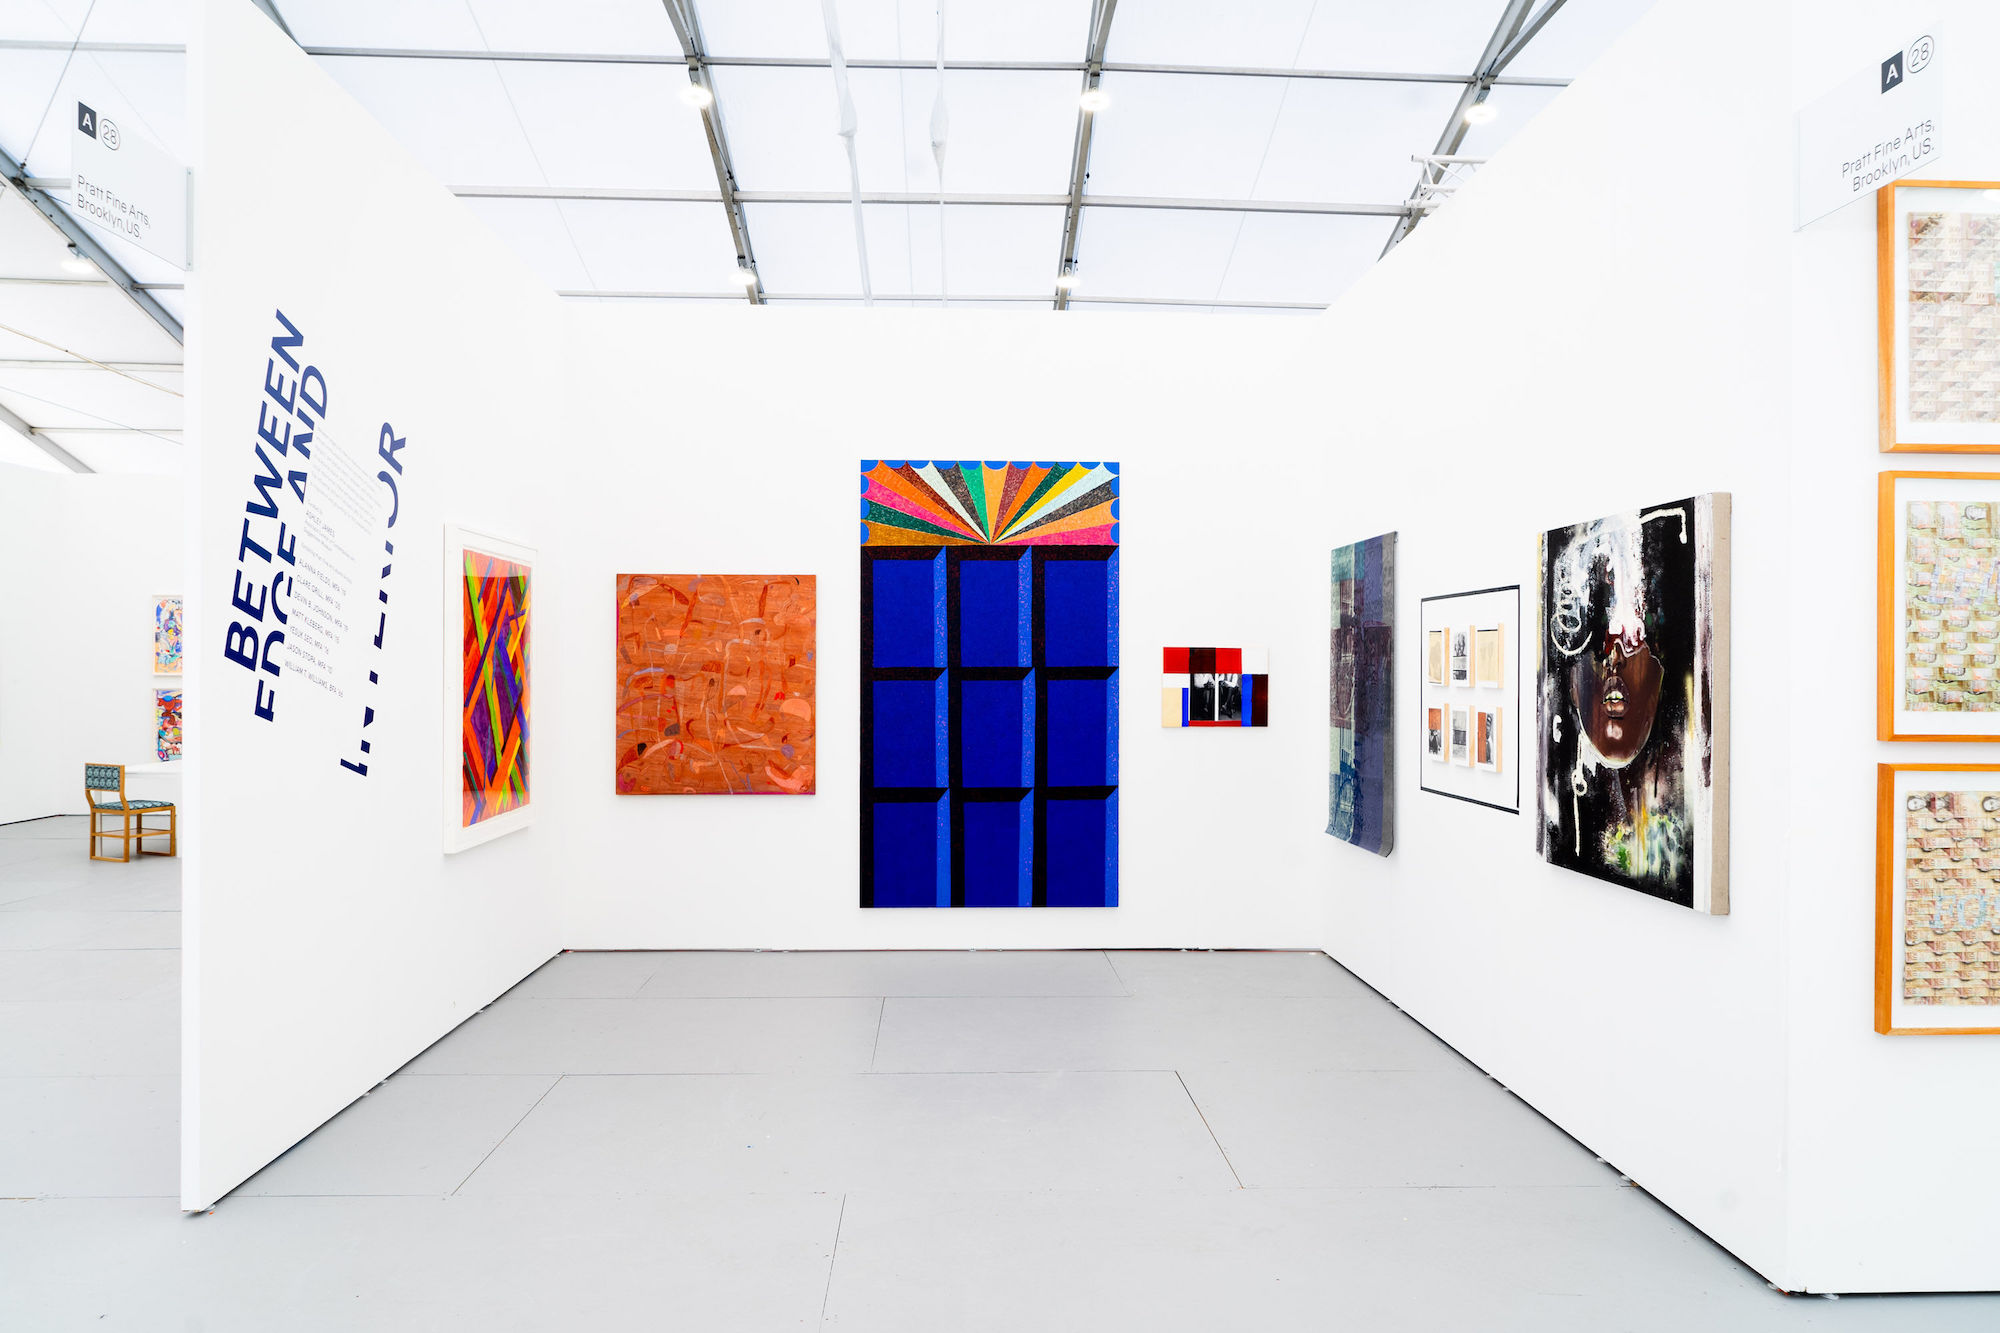 Installation view of Between edge and interior at UNTITLED, ART Miami Beach